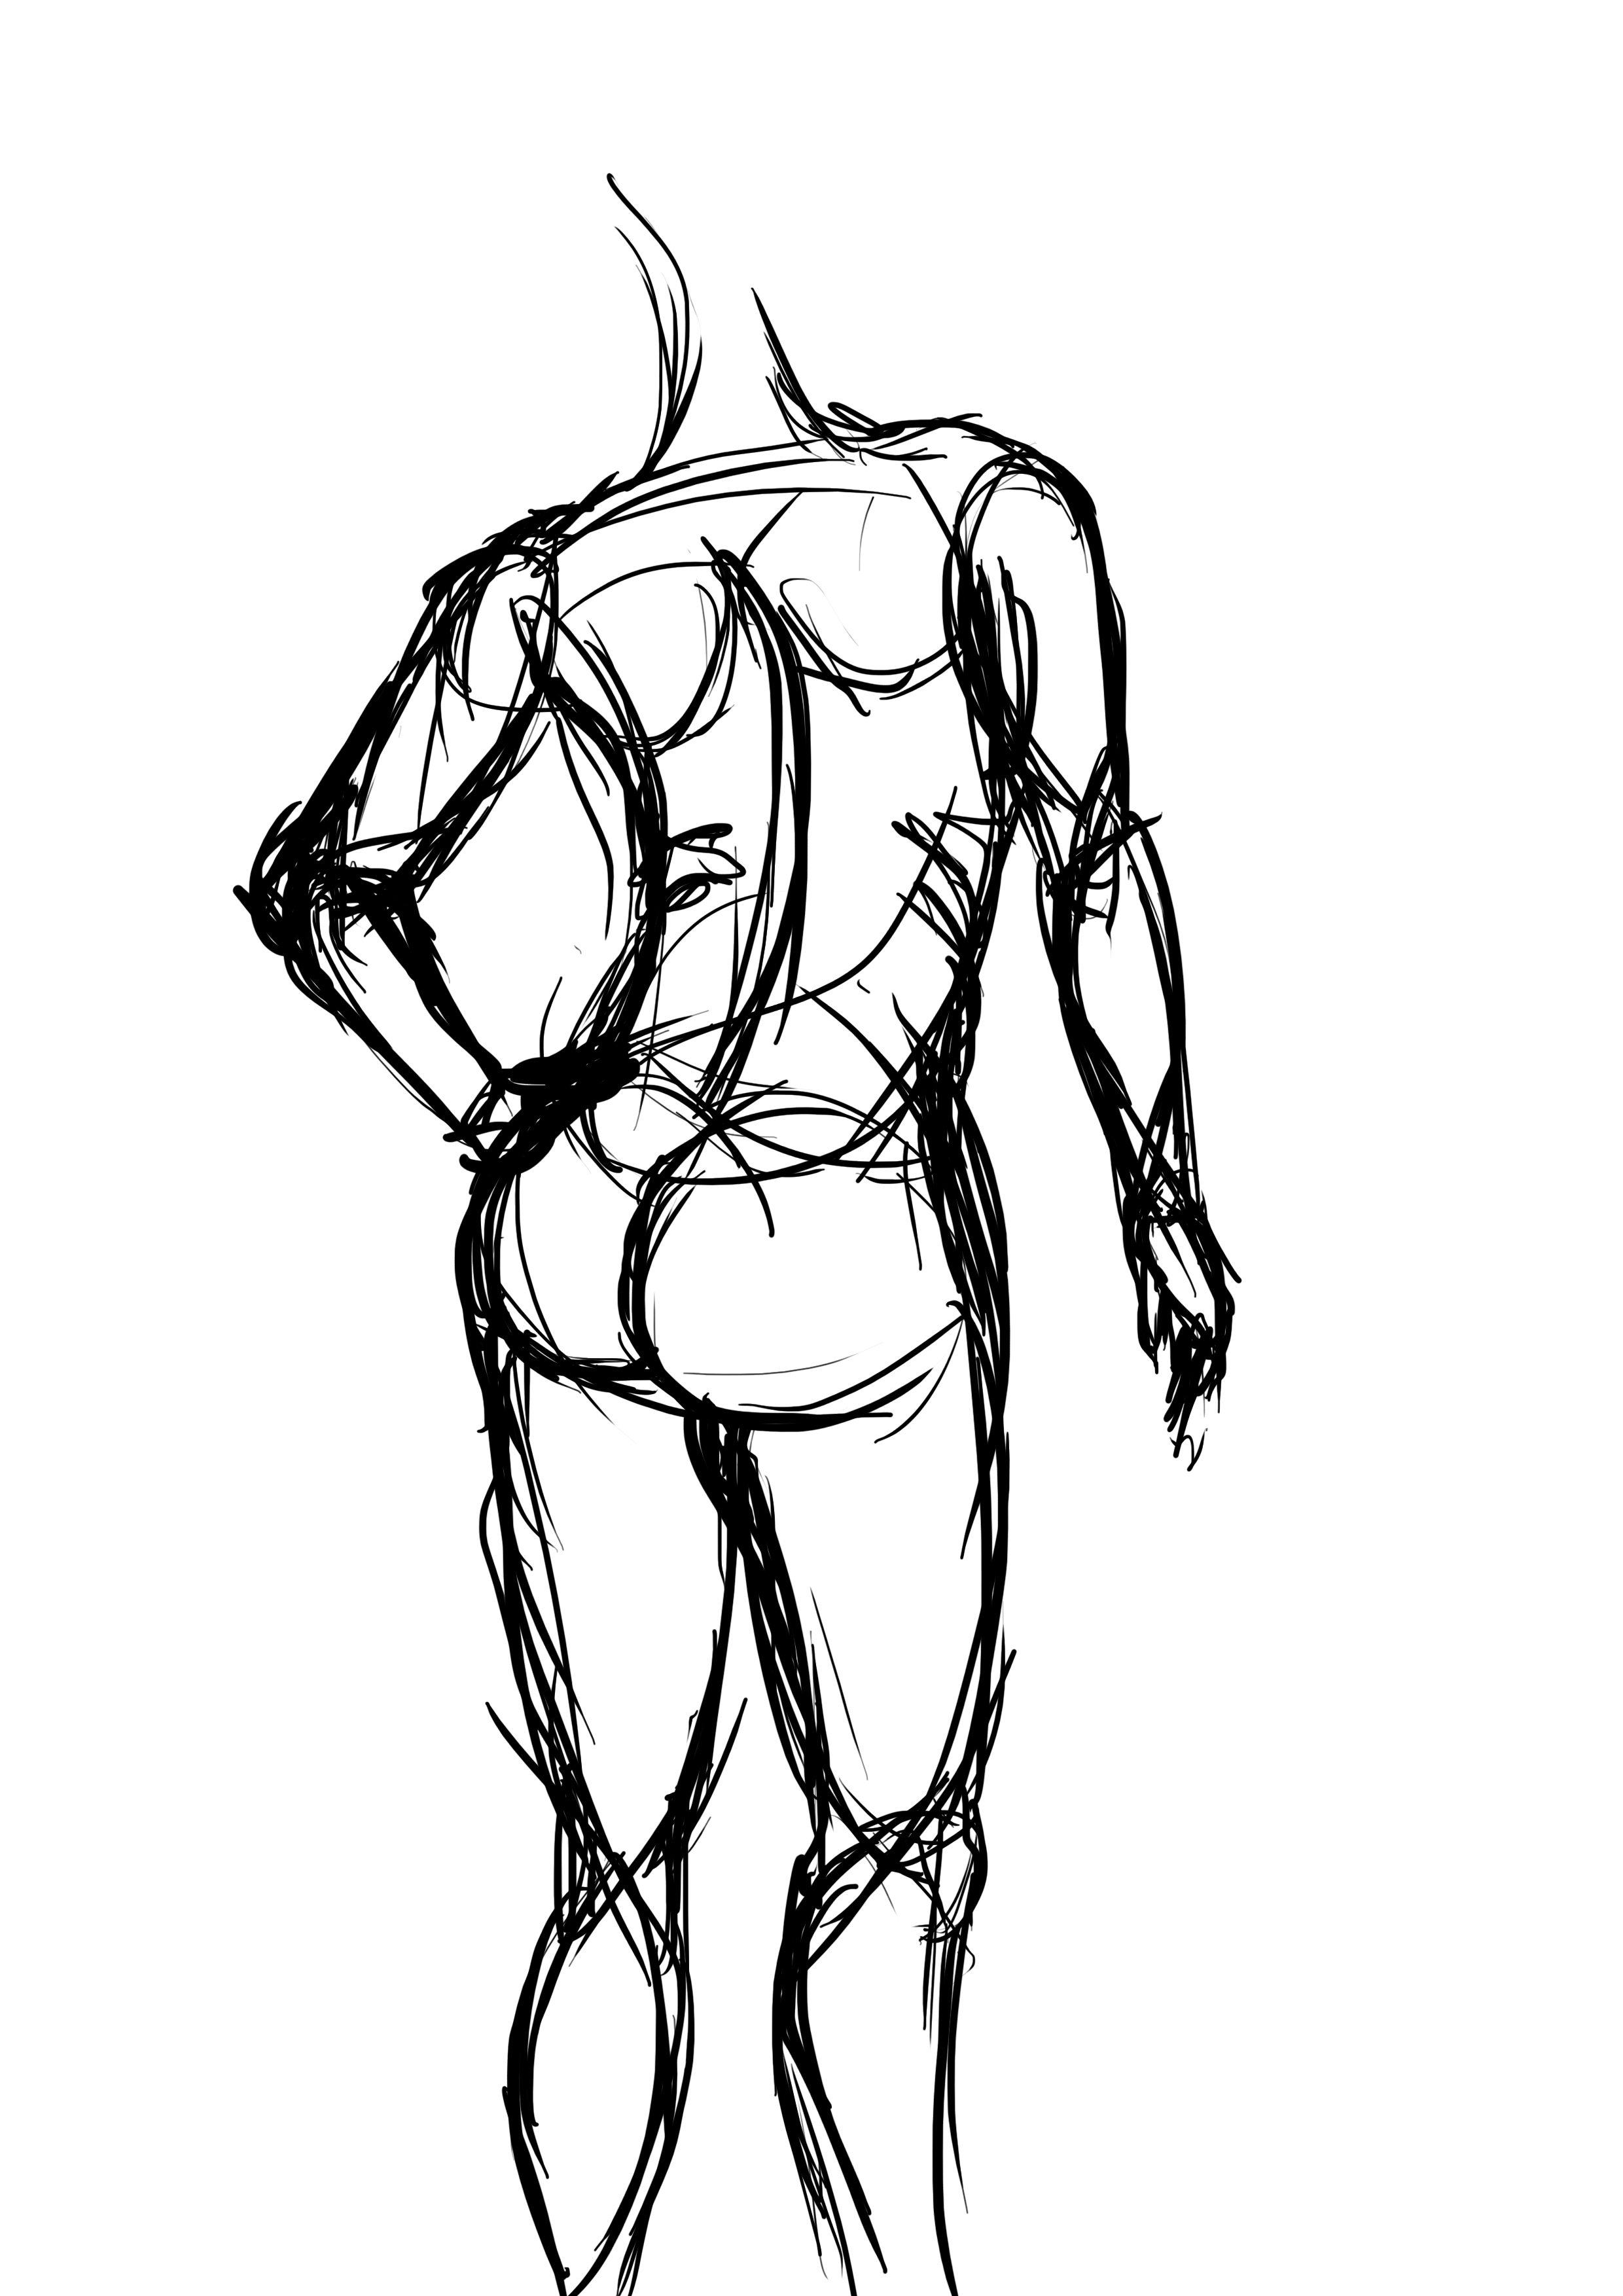 Anatomical Drawing Of Human Body / Figure Drawing - Proportion and